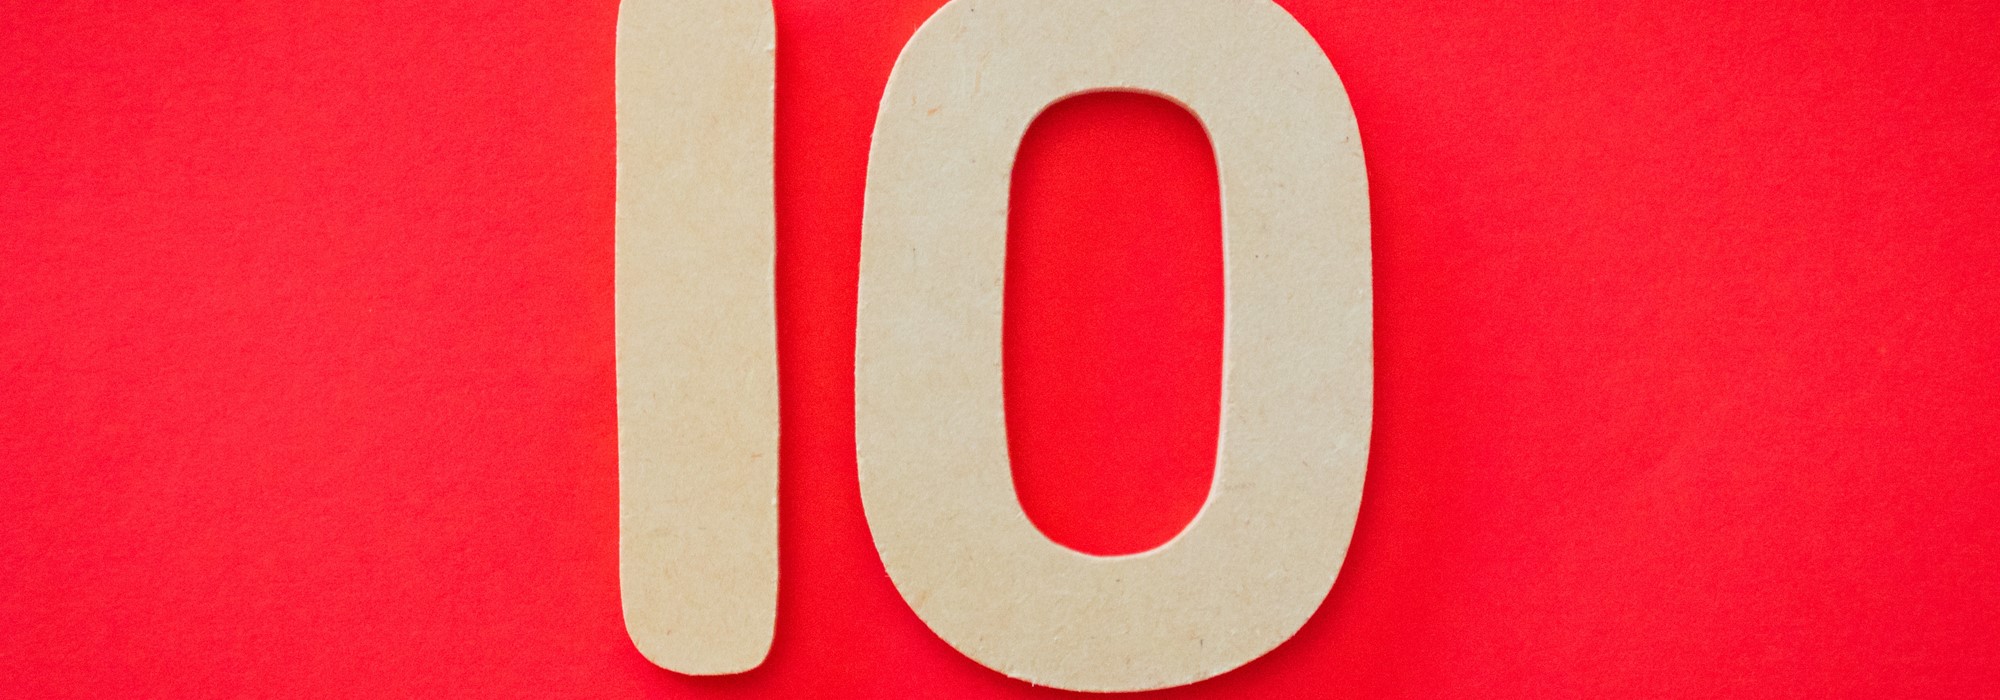 10 Things Employers Need To Do to Access the JobKeeper Payment 